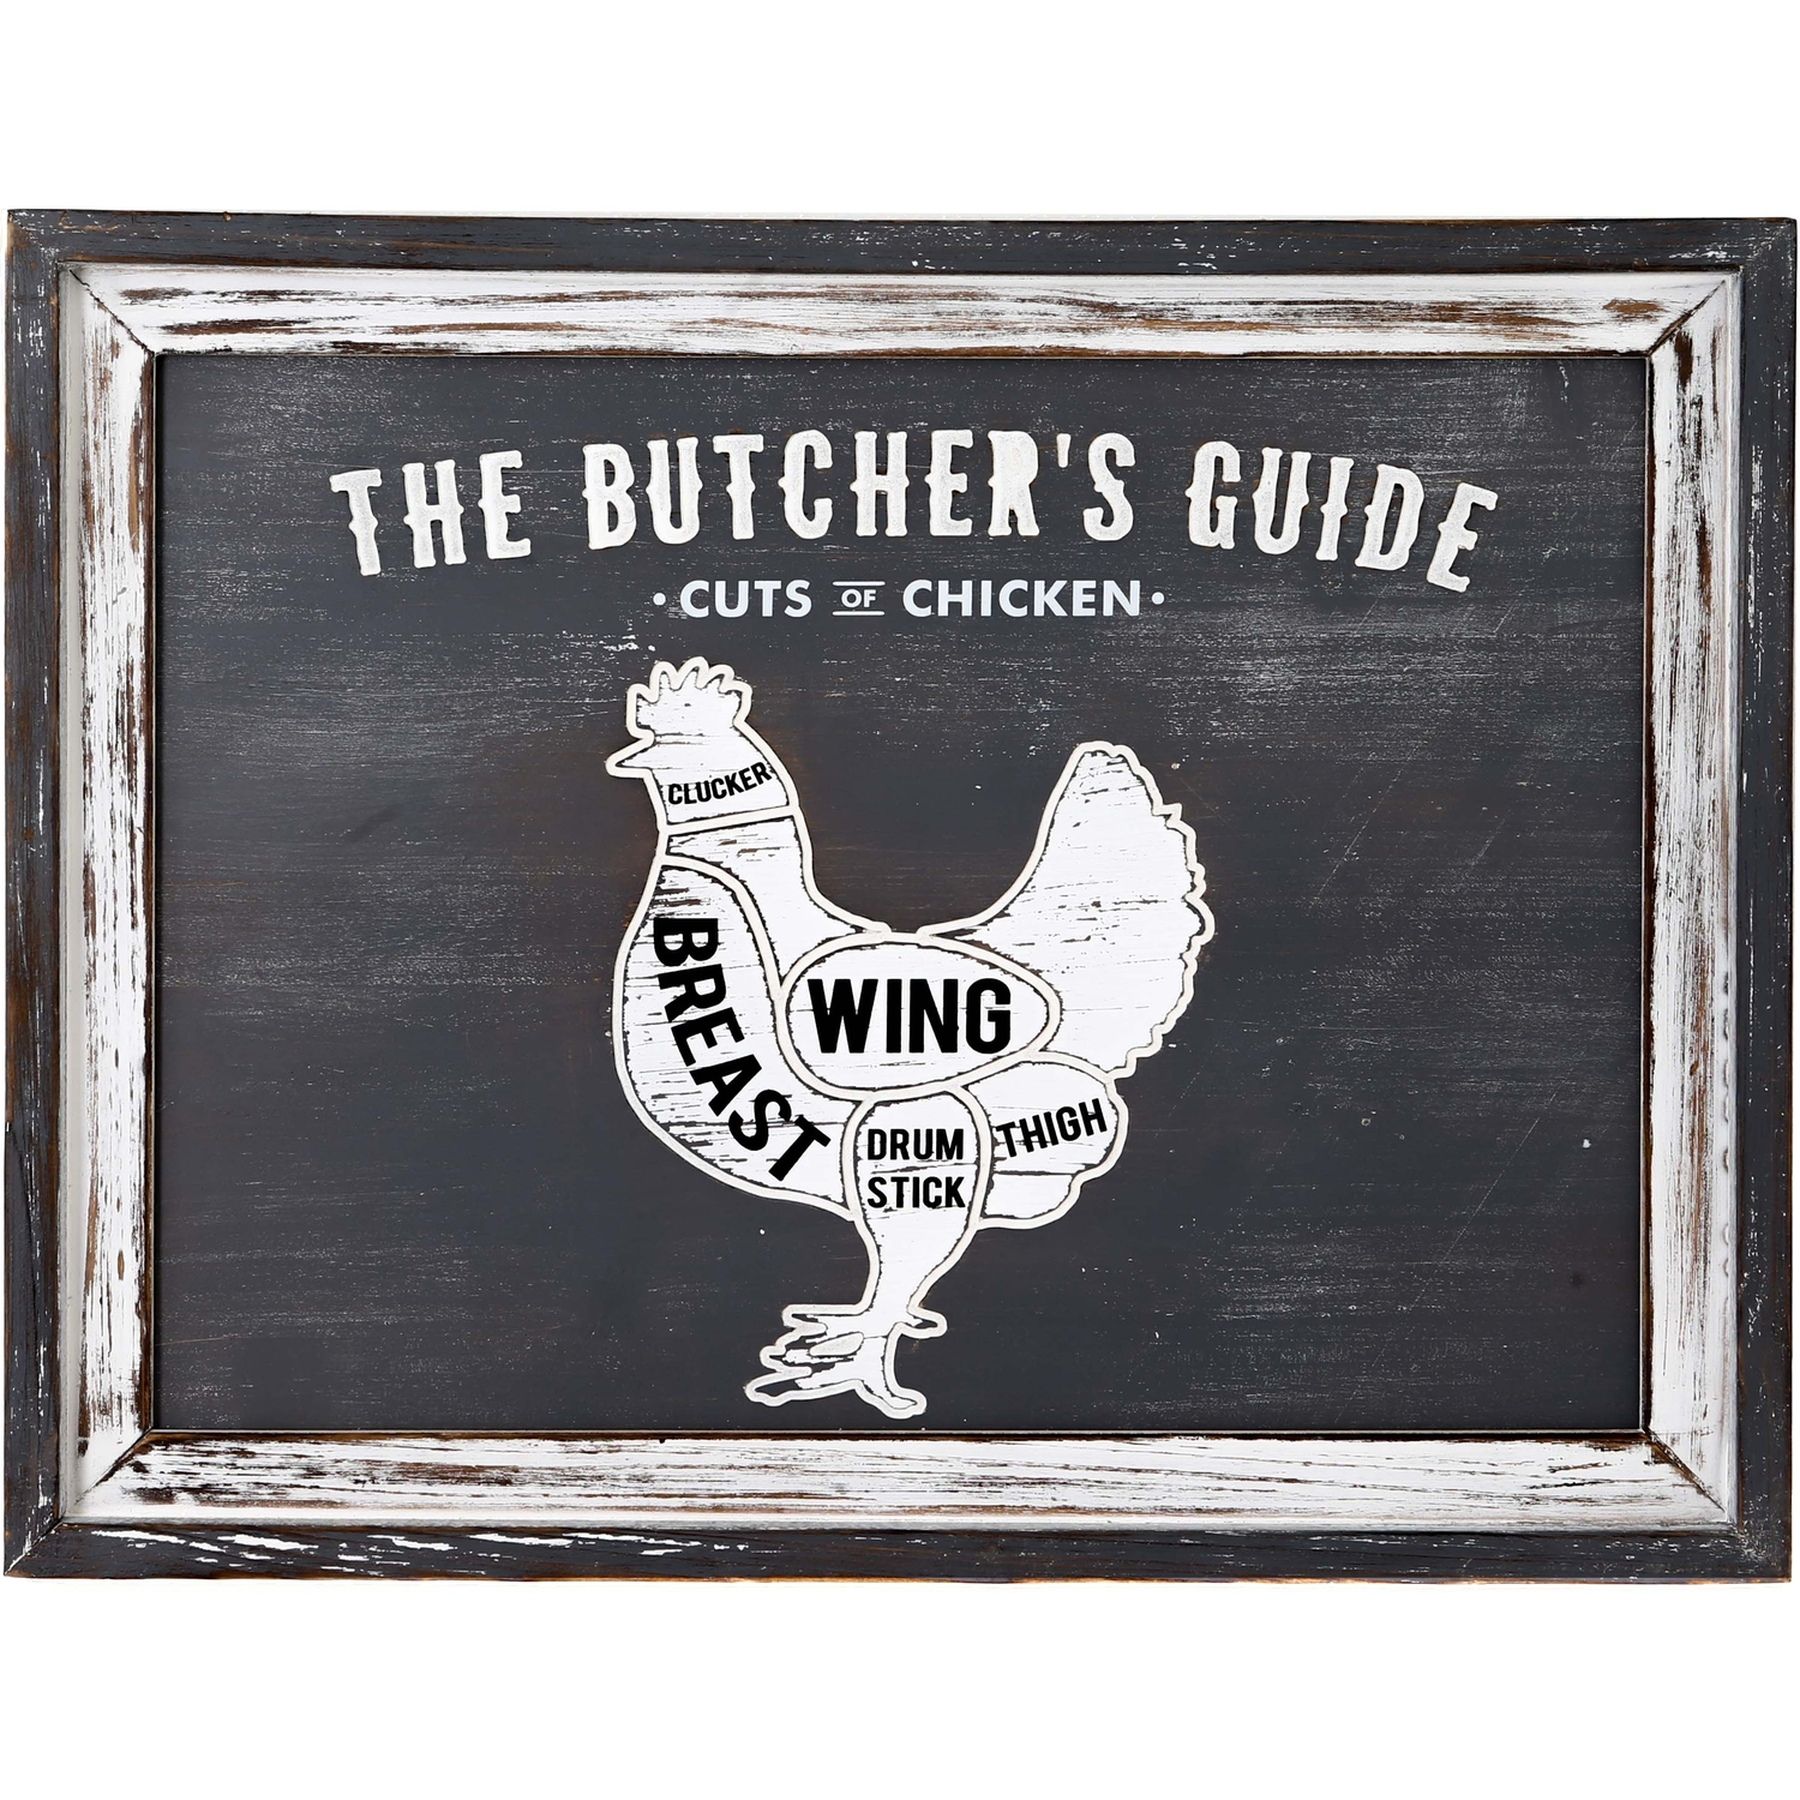 Butchers Cuts Chicken Wall Plaque - Image 1